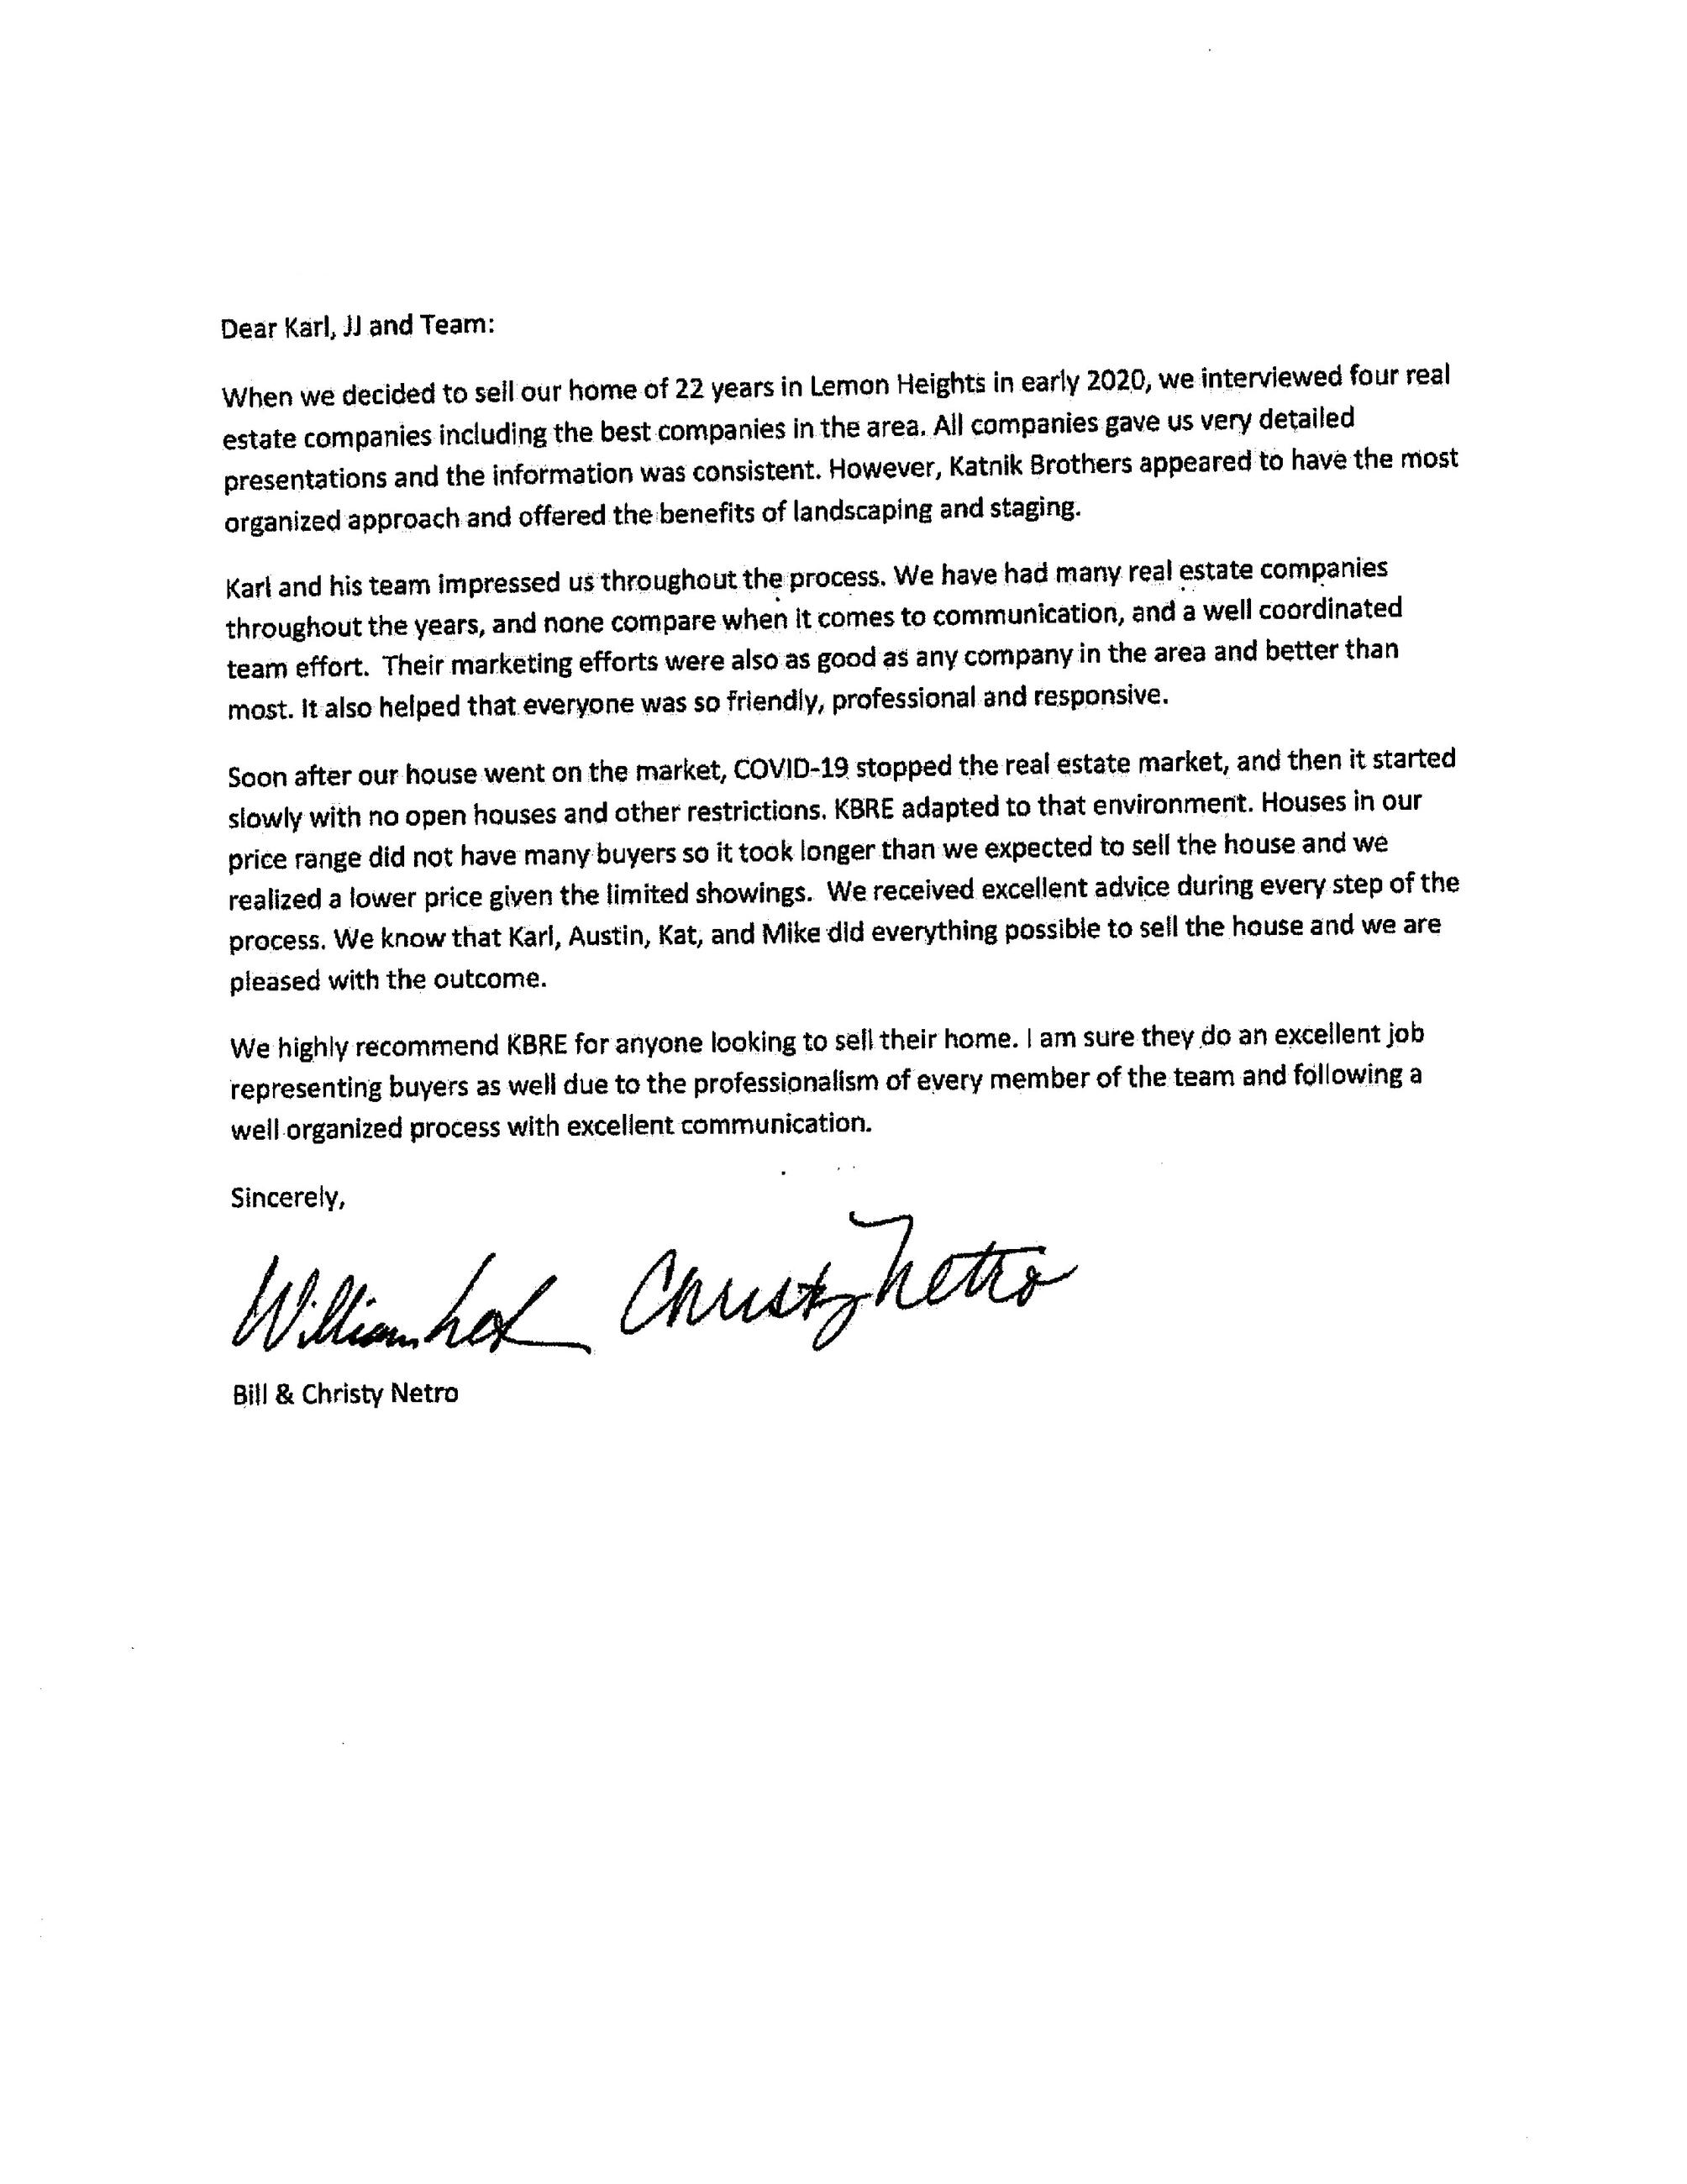 Netro Letter of Recommendation